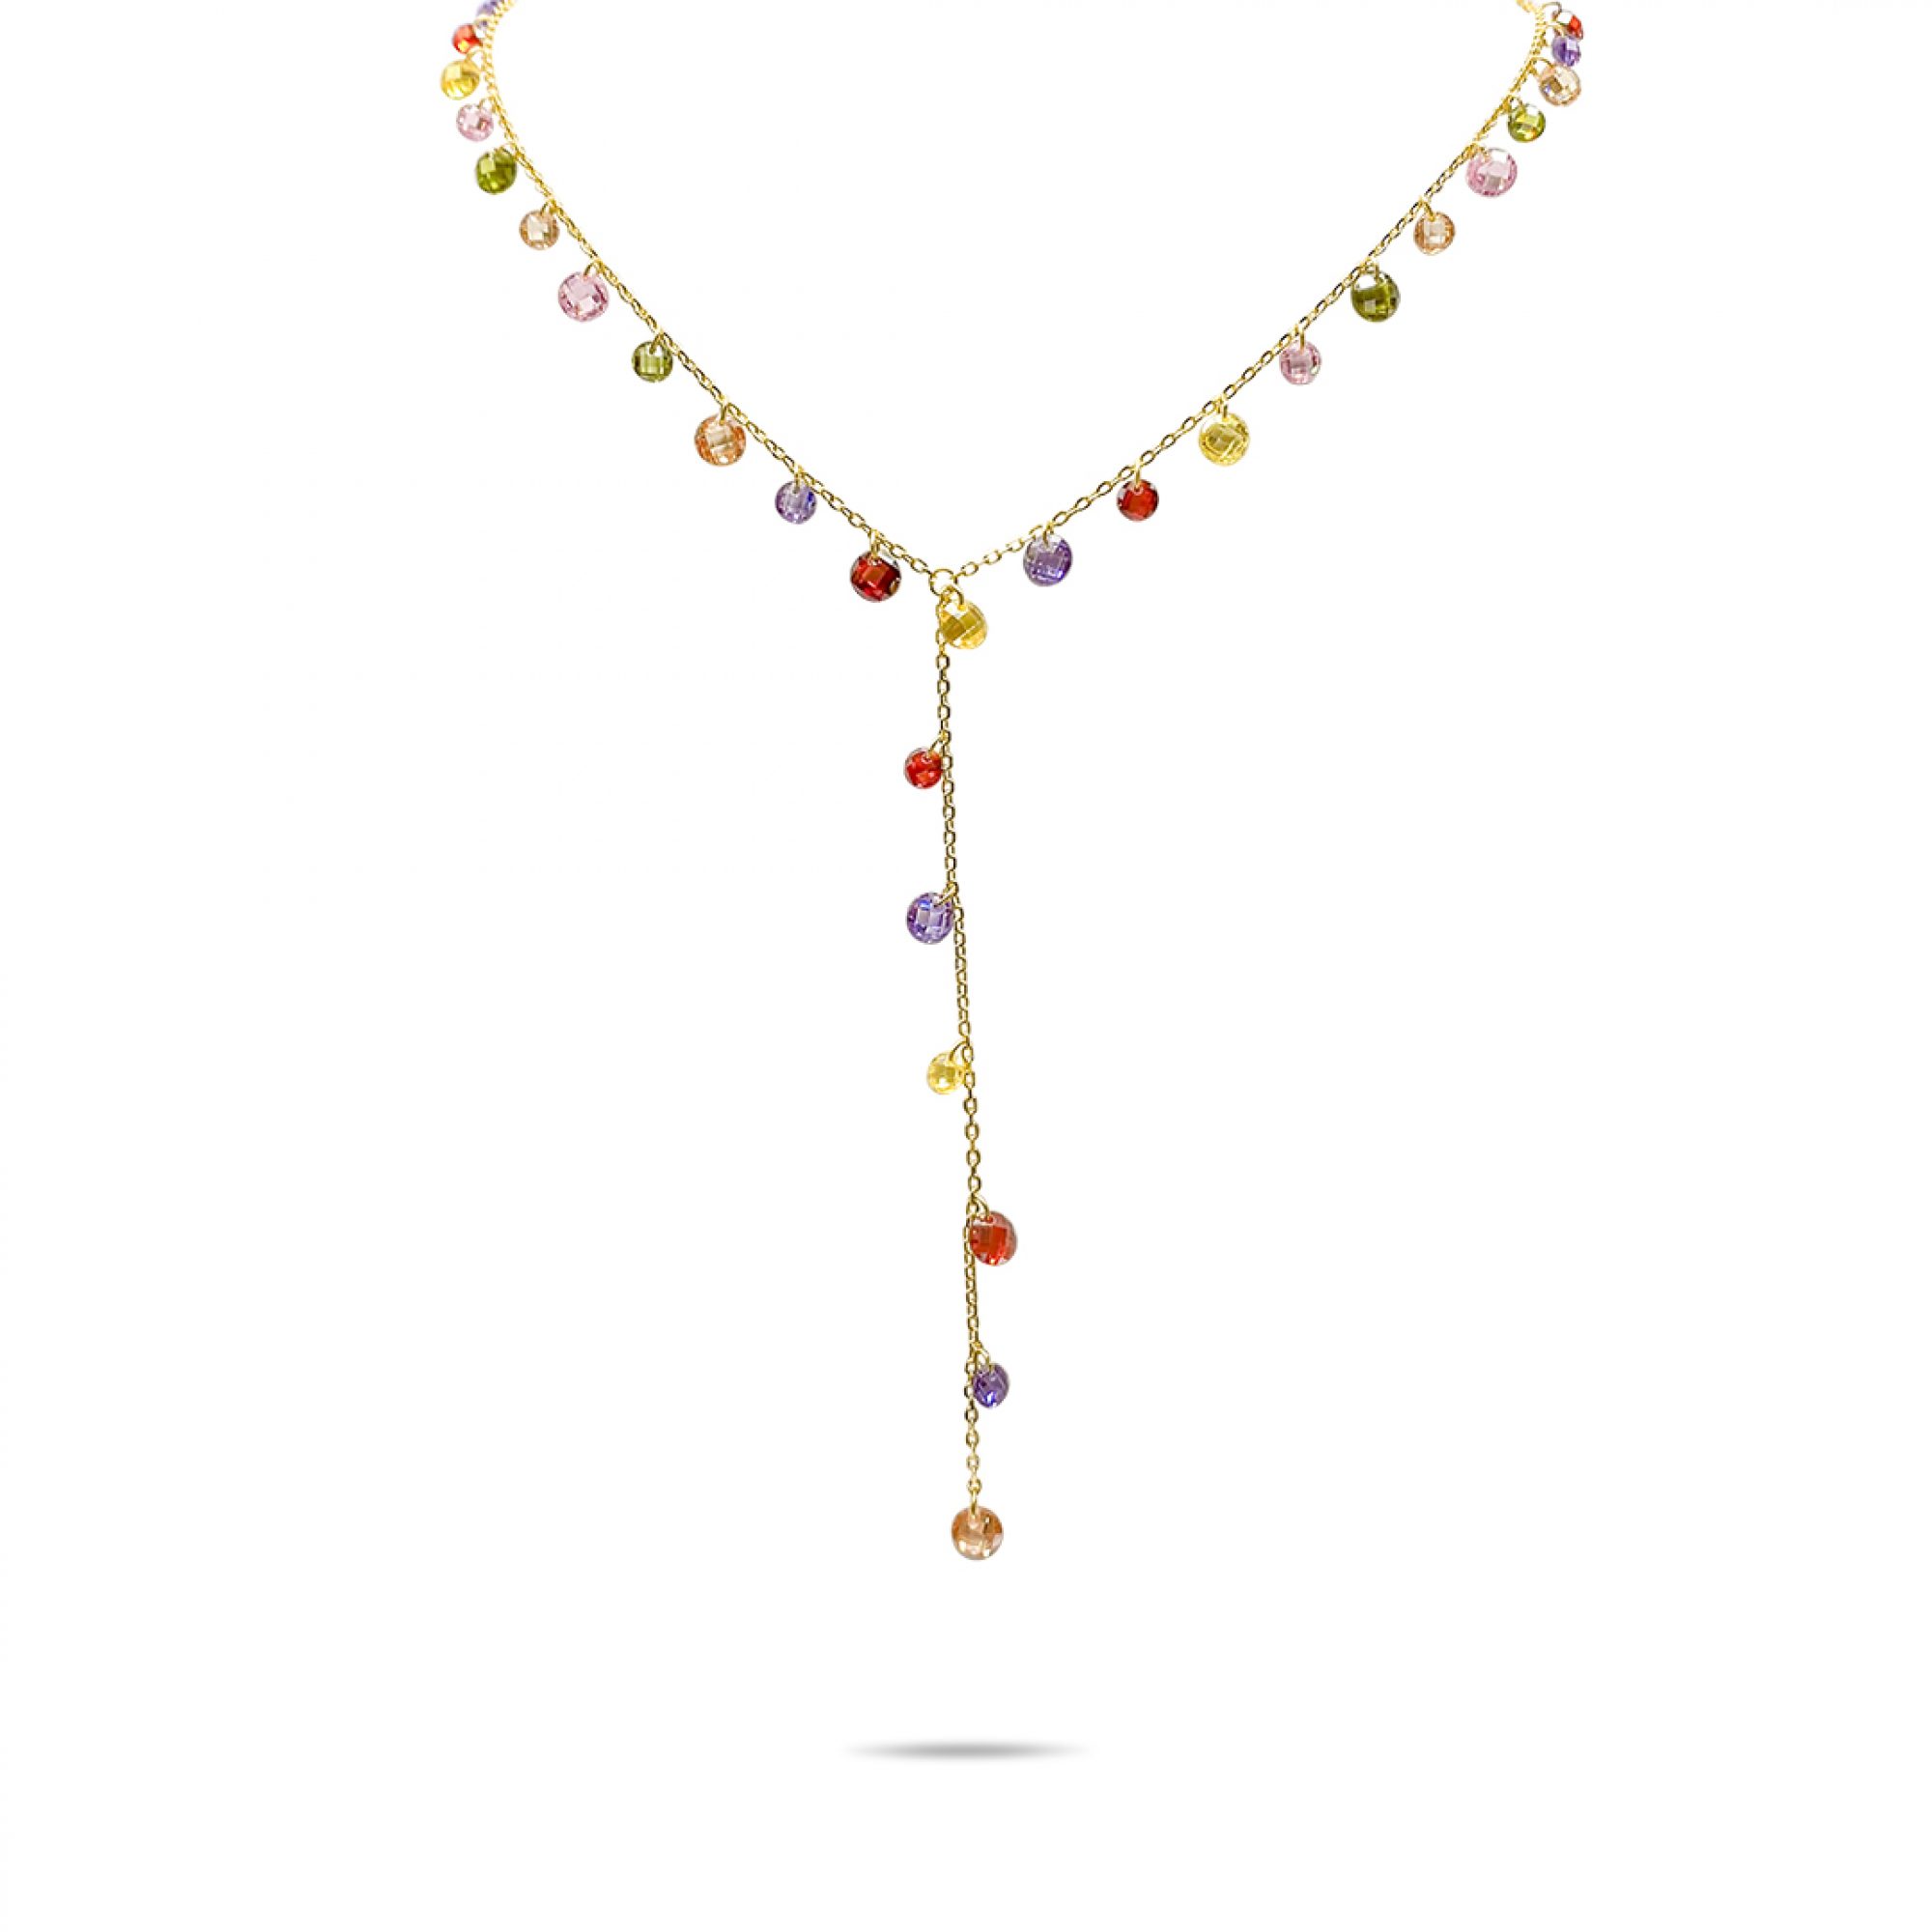 Y-style silver necklace with coloured stones